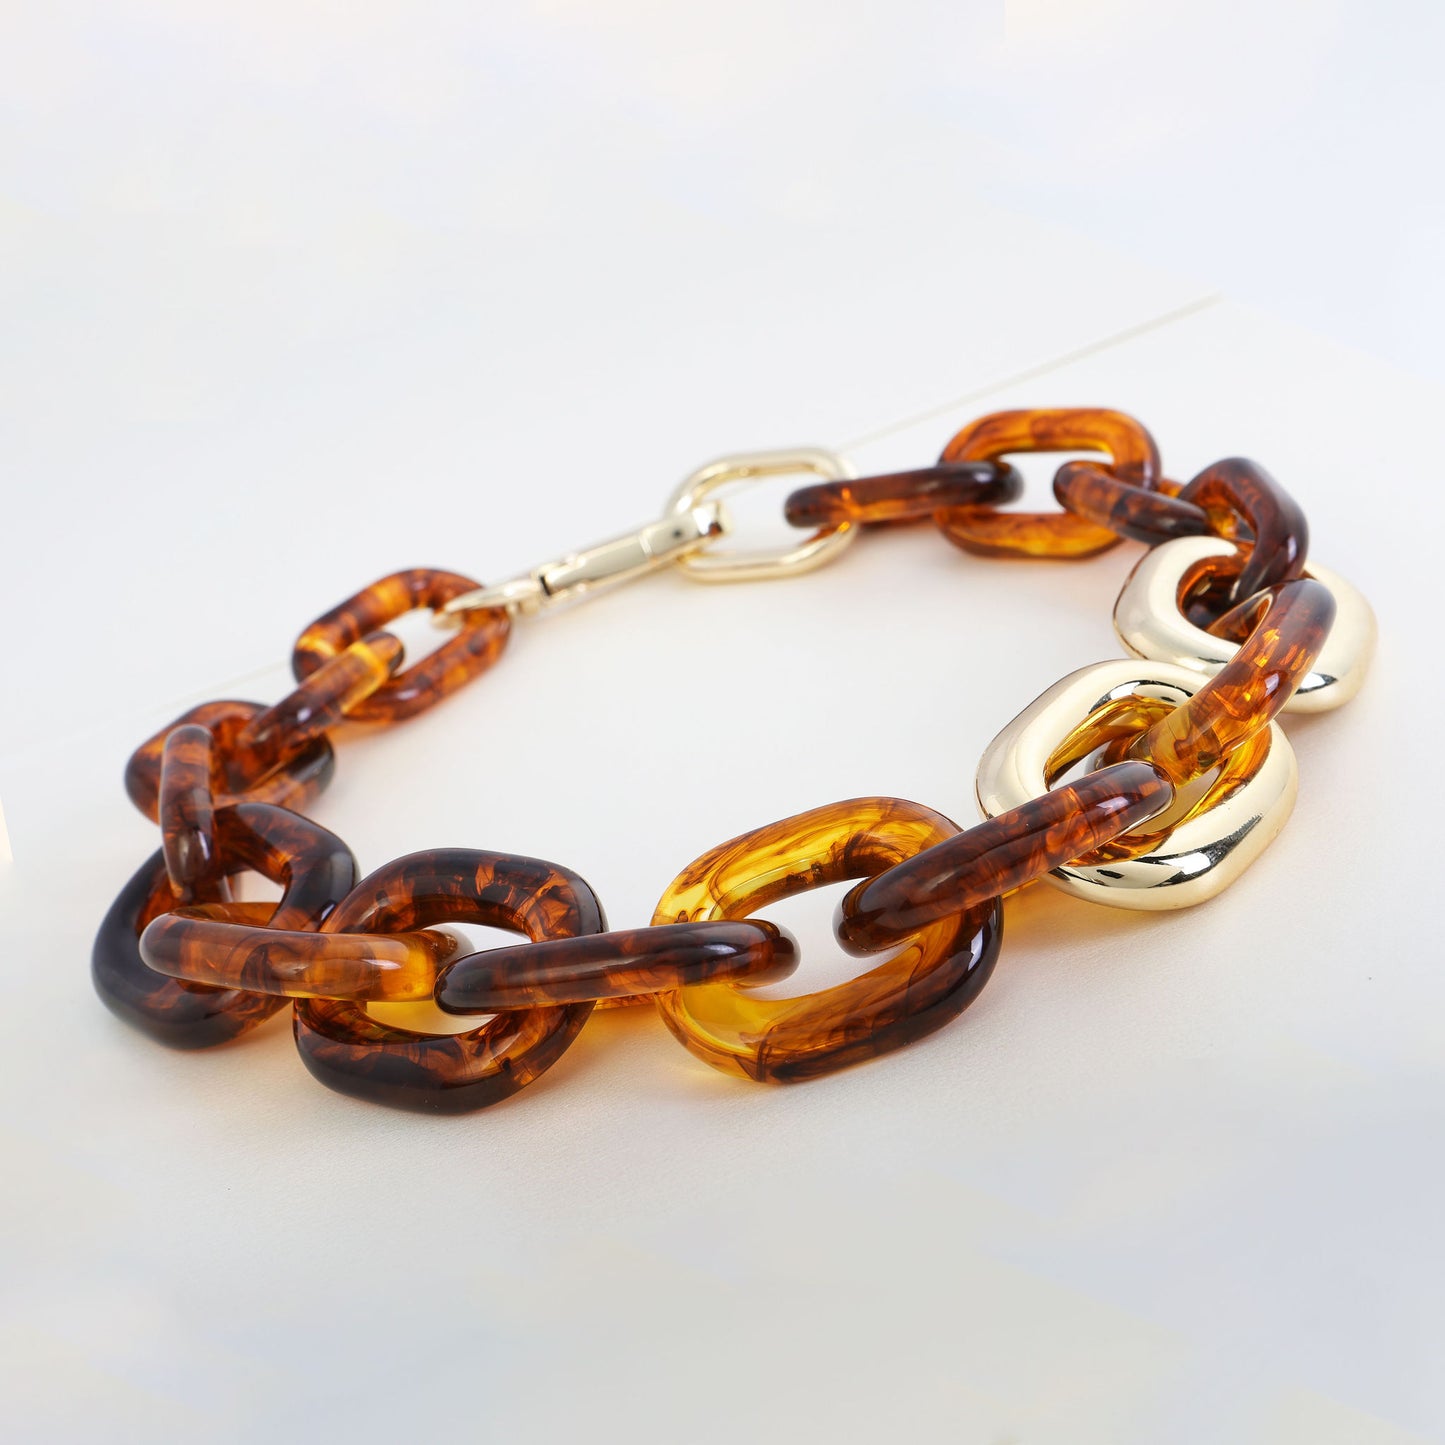 Amber tortoise chunky chain necklace.  The beauty of tortoise shell, blending gold link chain necklace